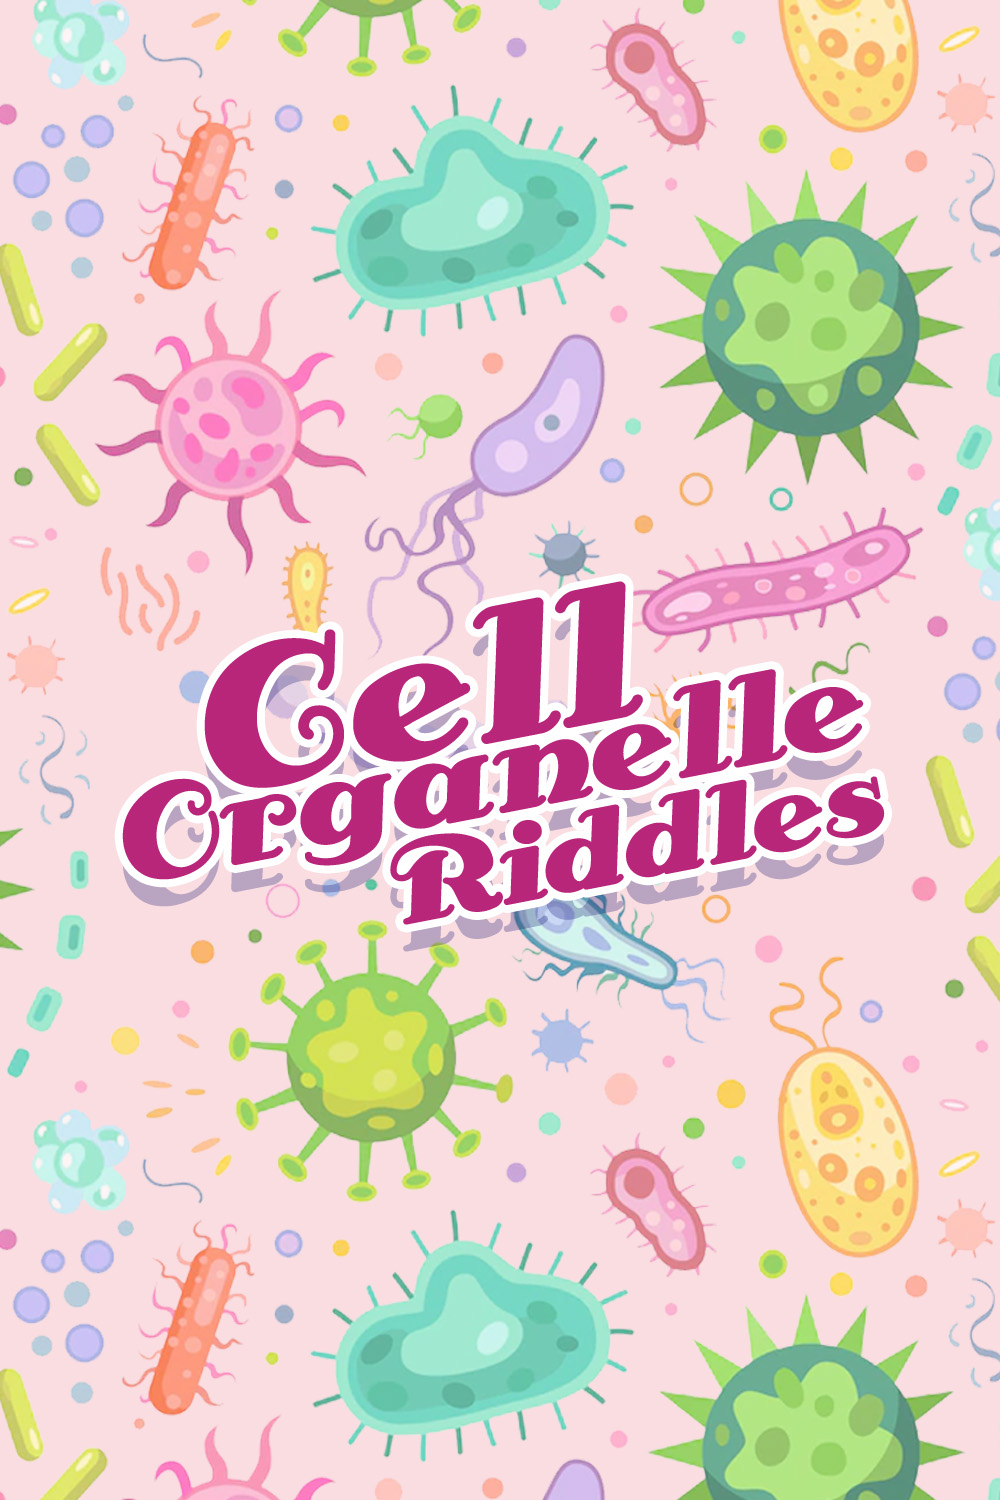 Cell Organelle Riddles Worksheet Answers